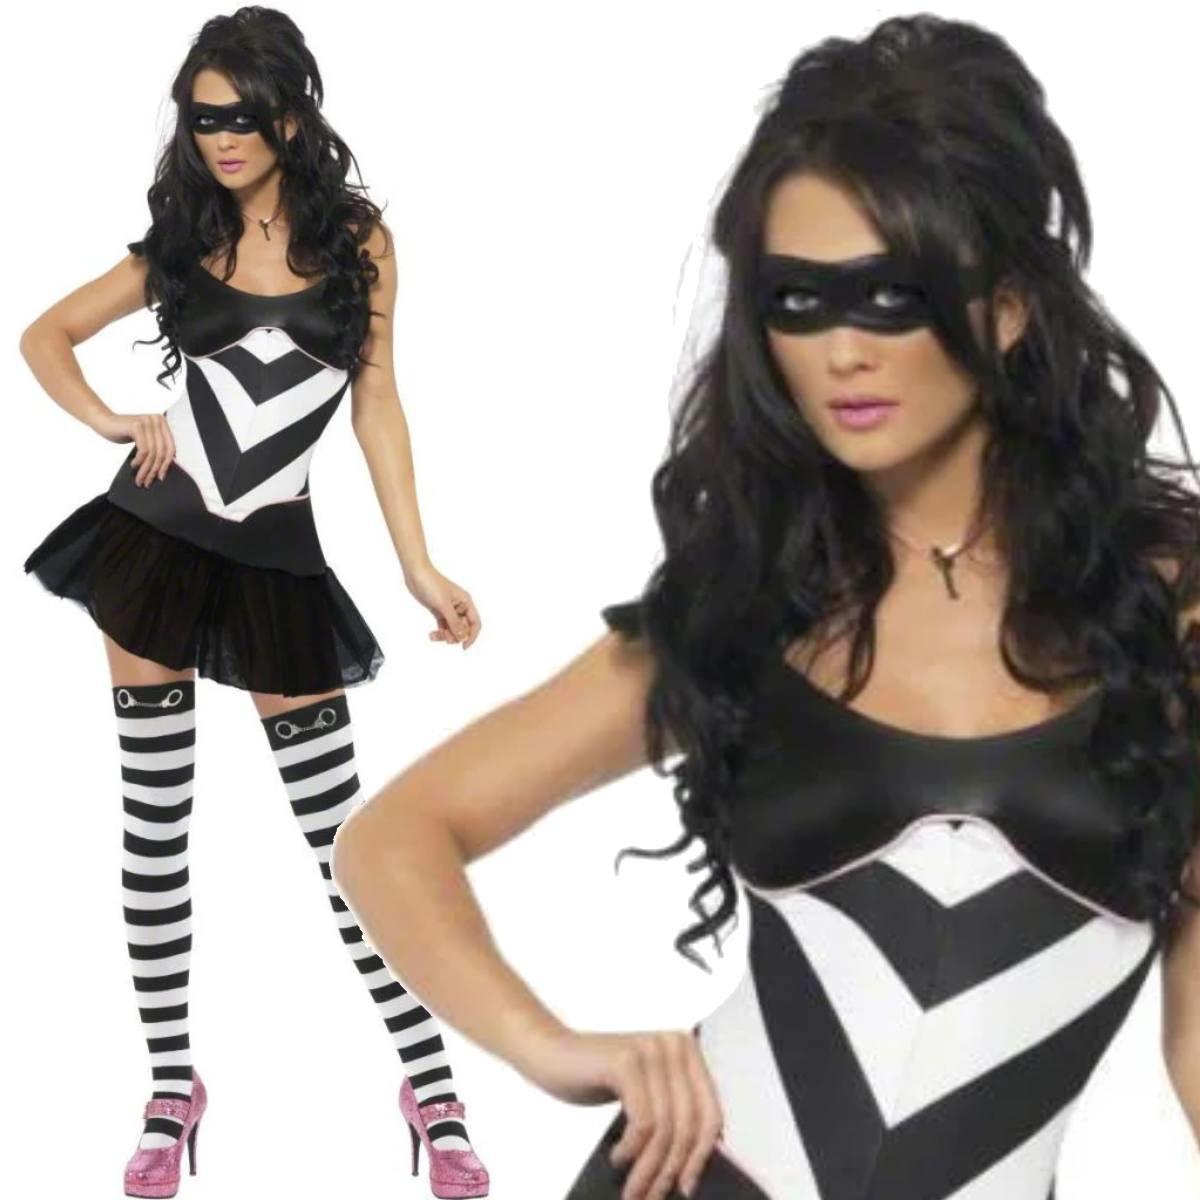 Asking For Trouble Prisoner Costume by Smiffys  20891 available here at Karnival Costumes online party shop